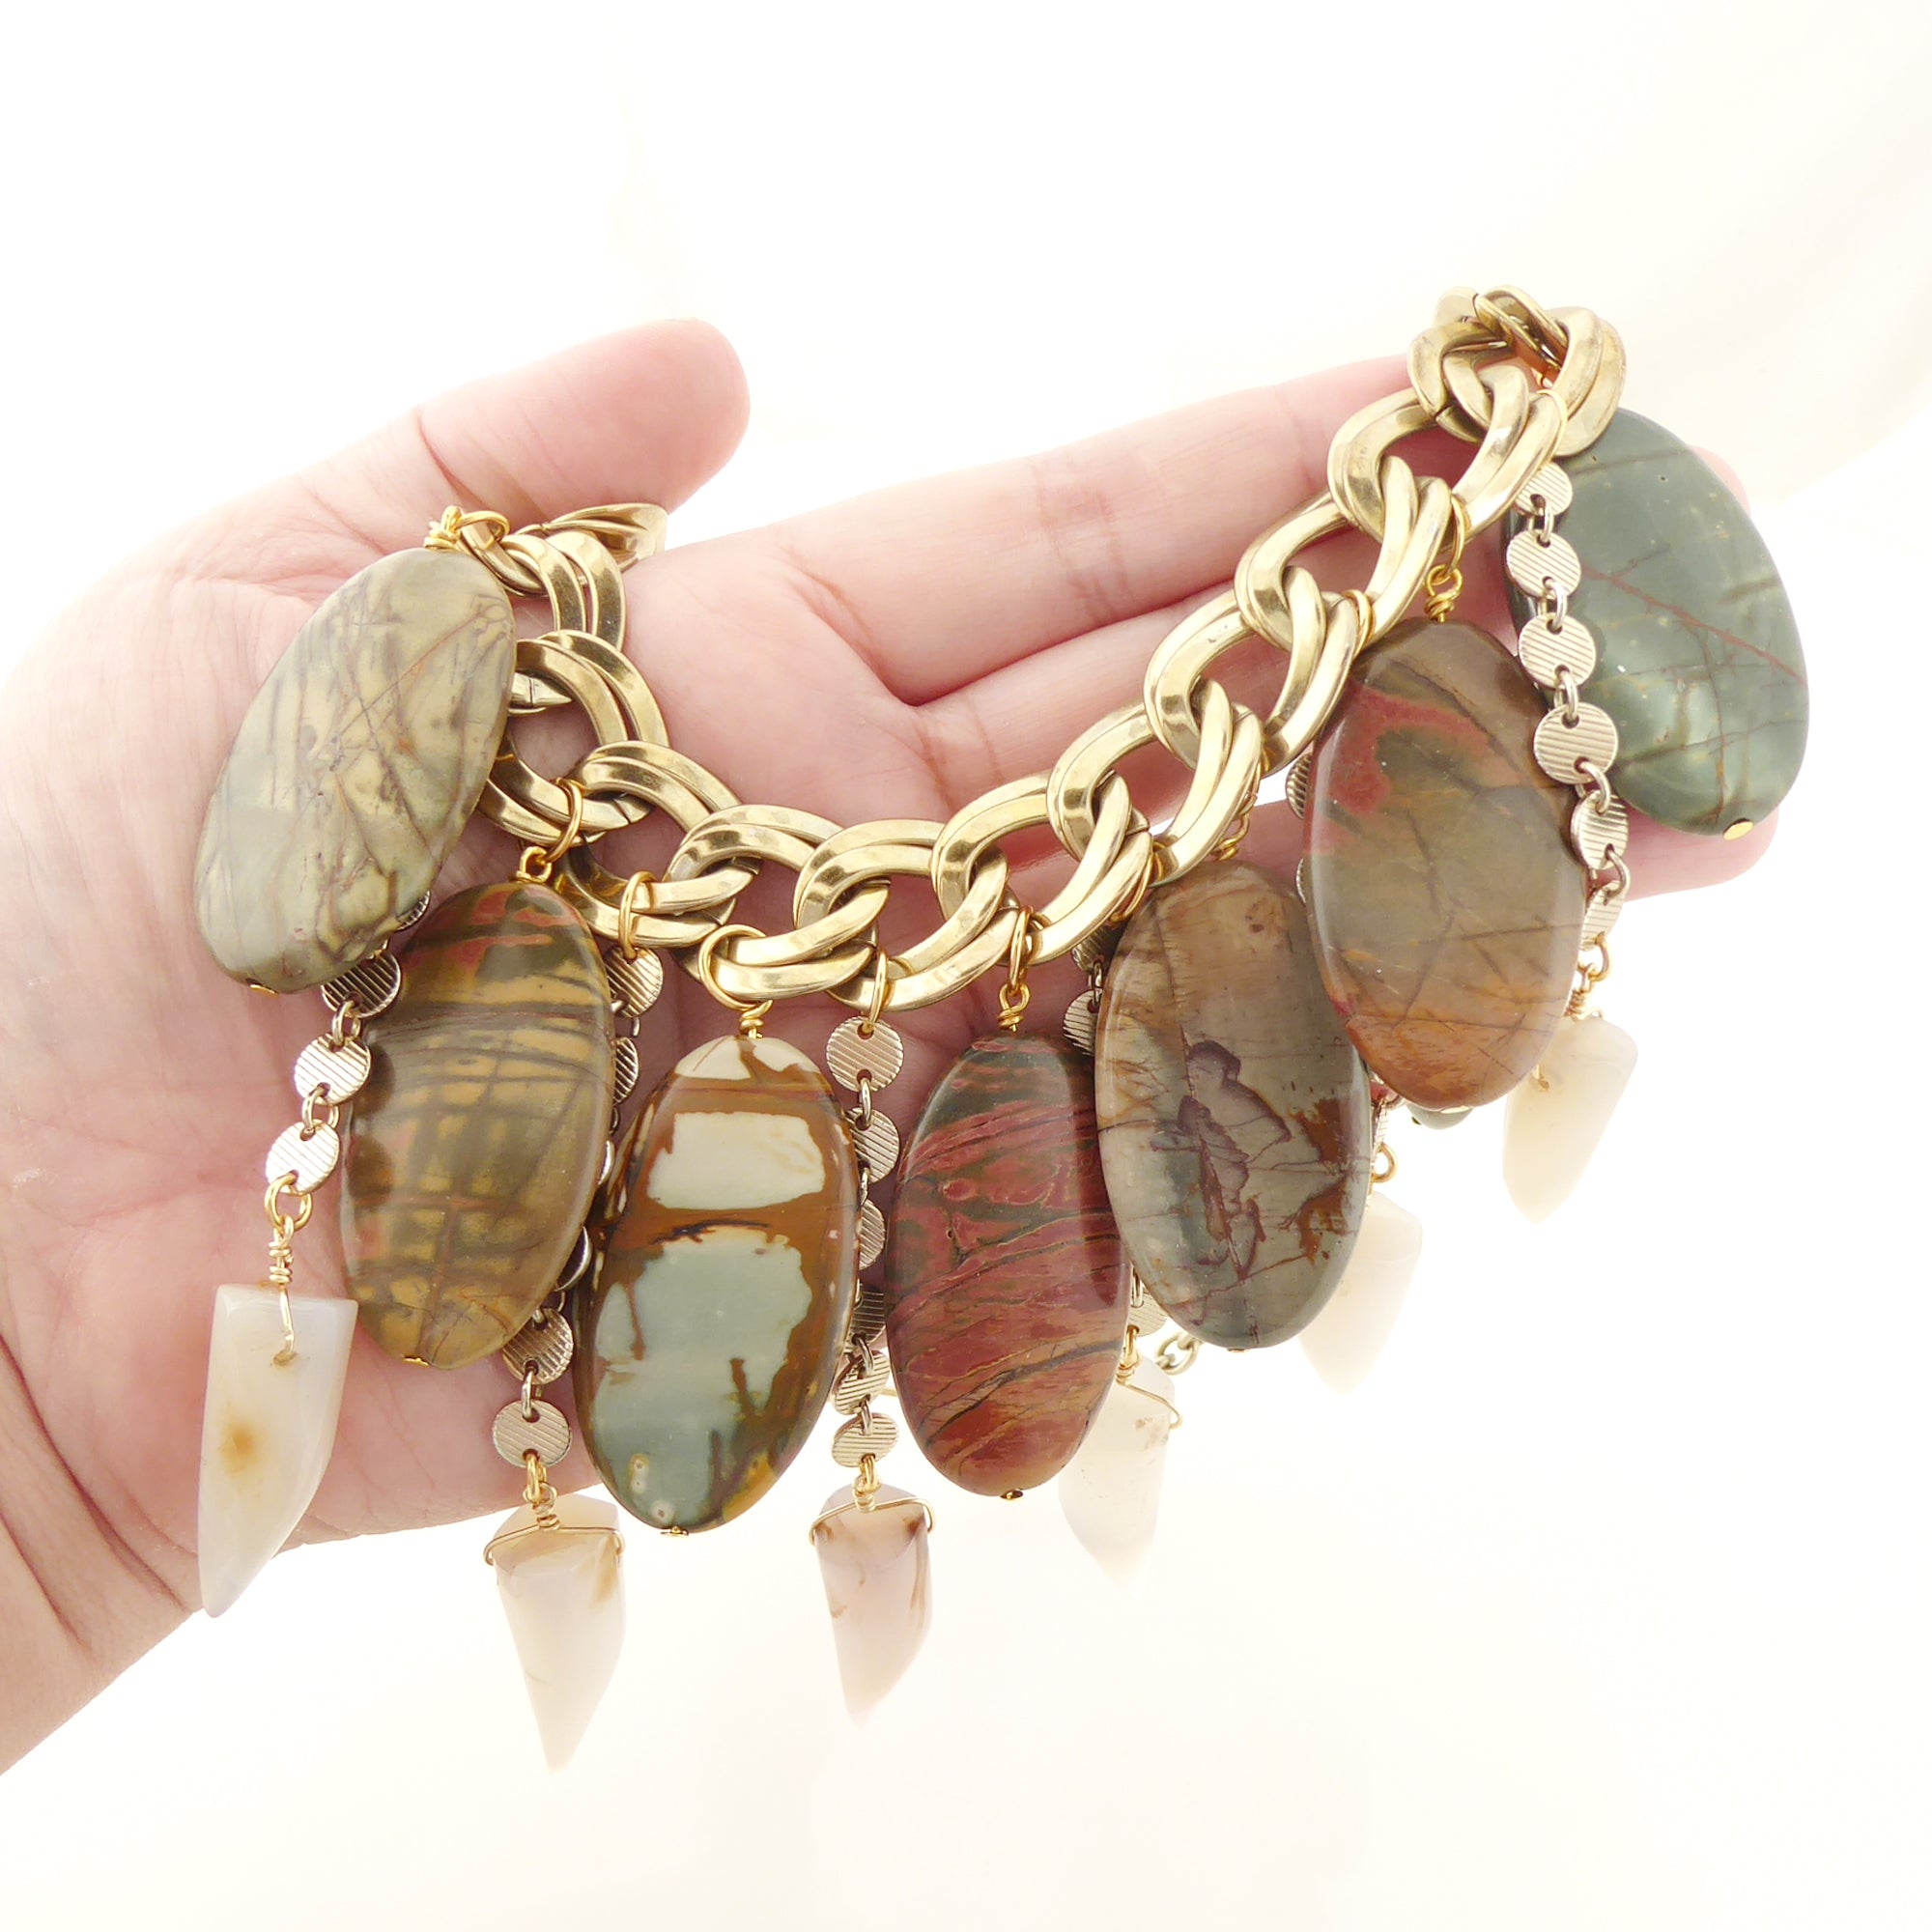 Red creek jasper and agate tusk necklace by Jenny Dayco 6